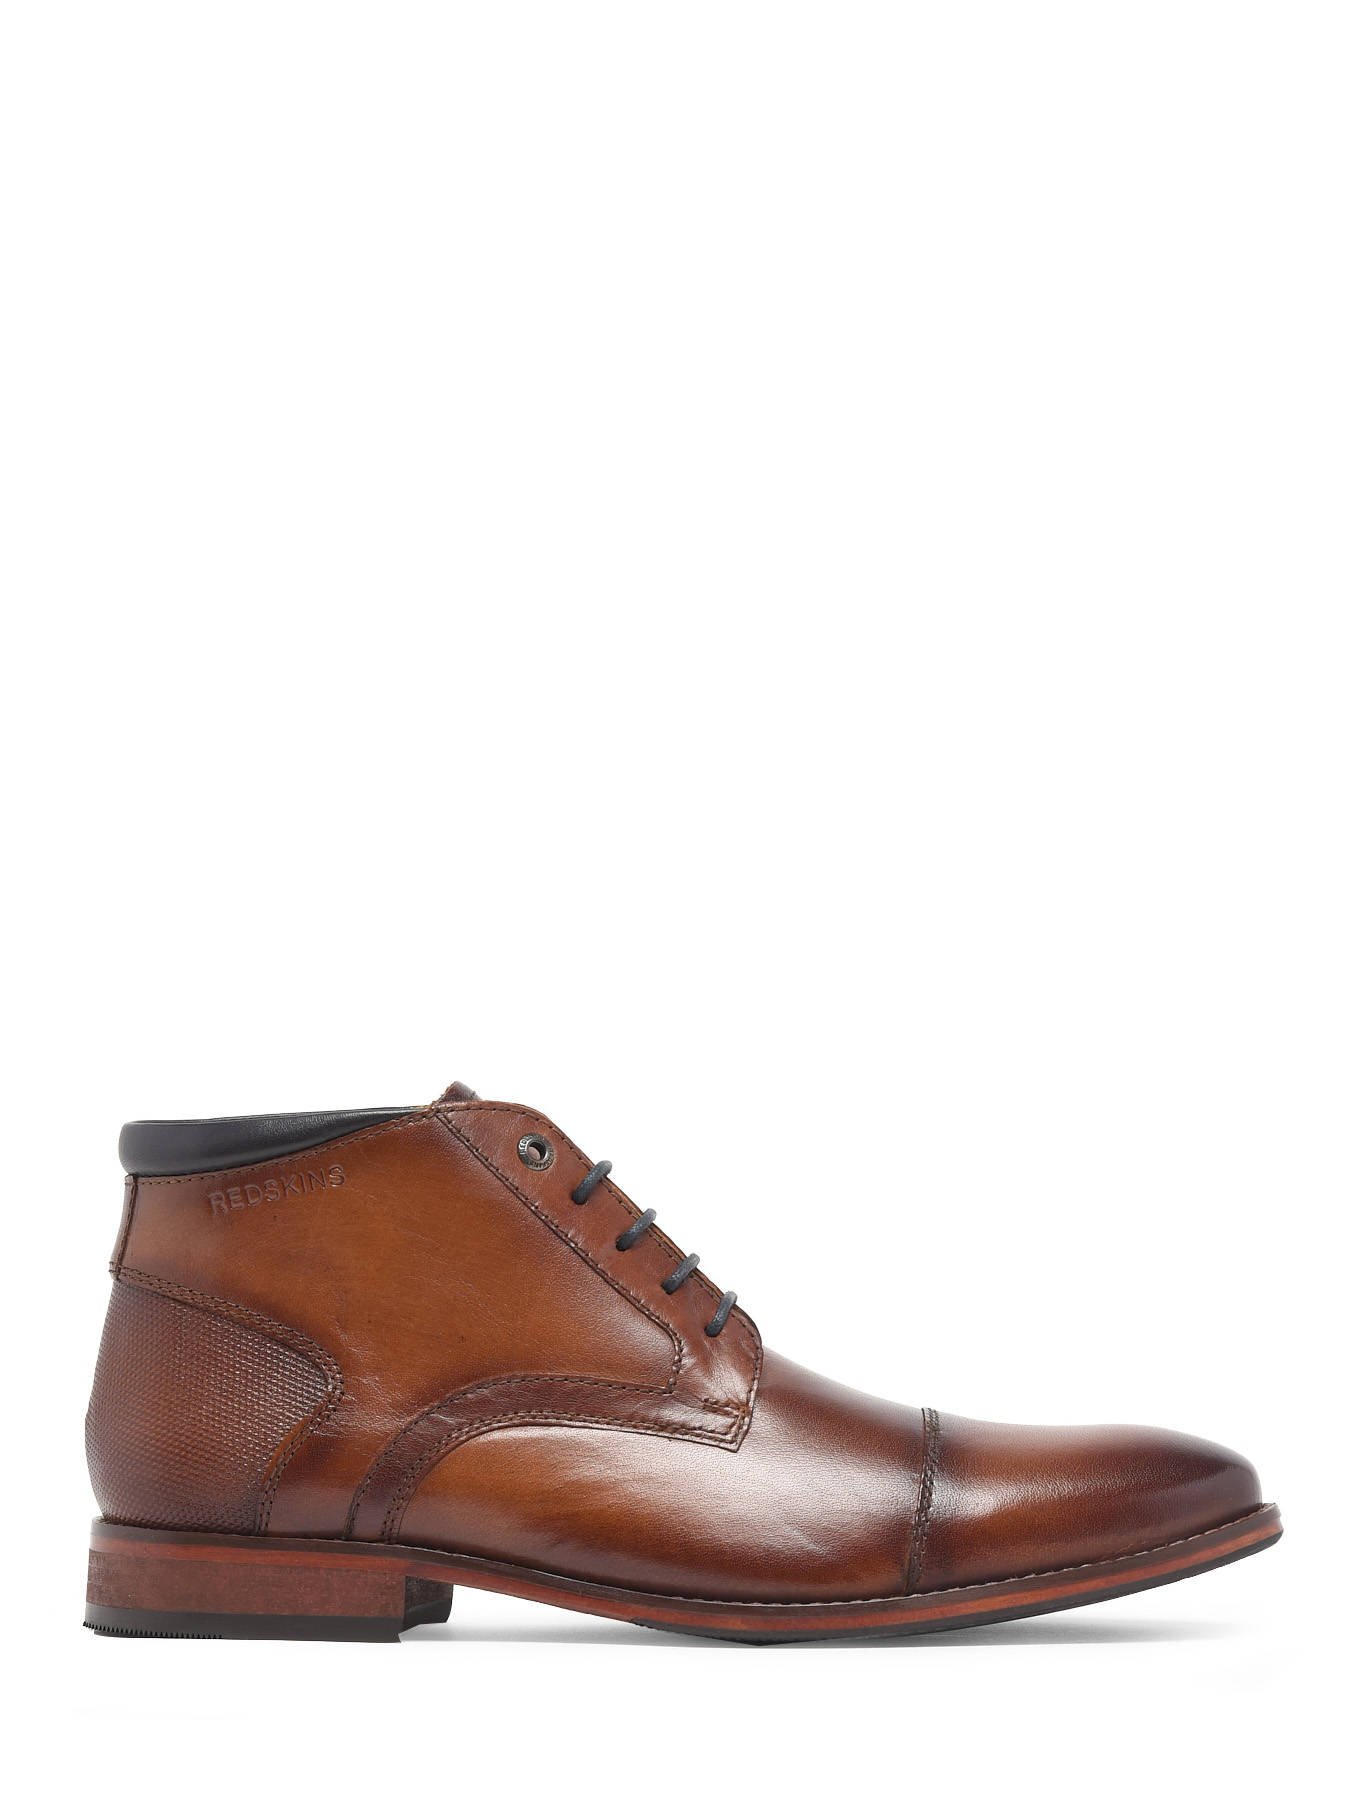 Redskins Lace-up shoes VISUEL - best prices